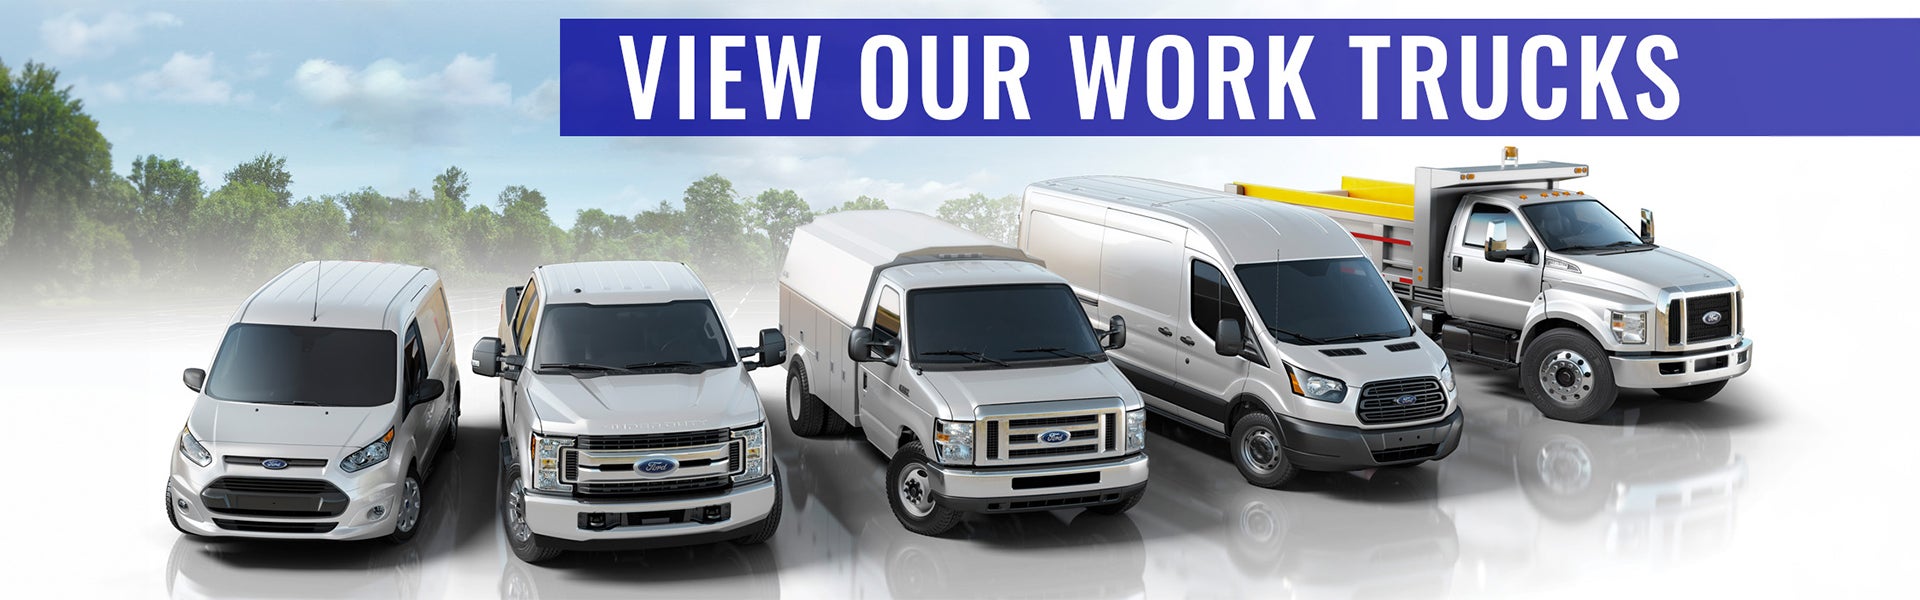 View our work trucks